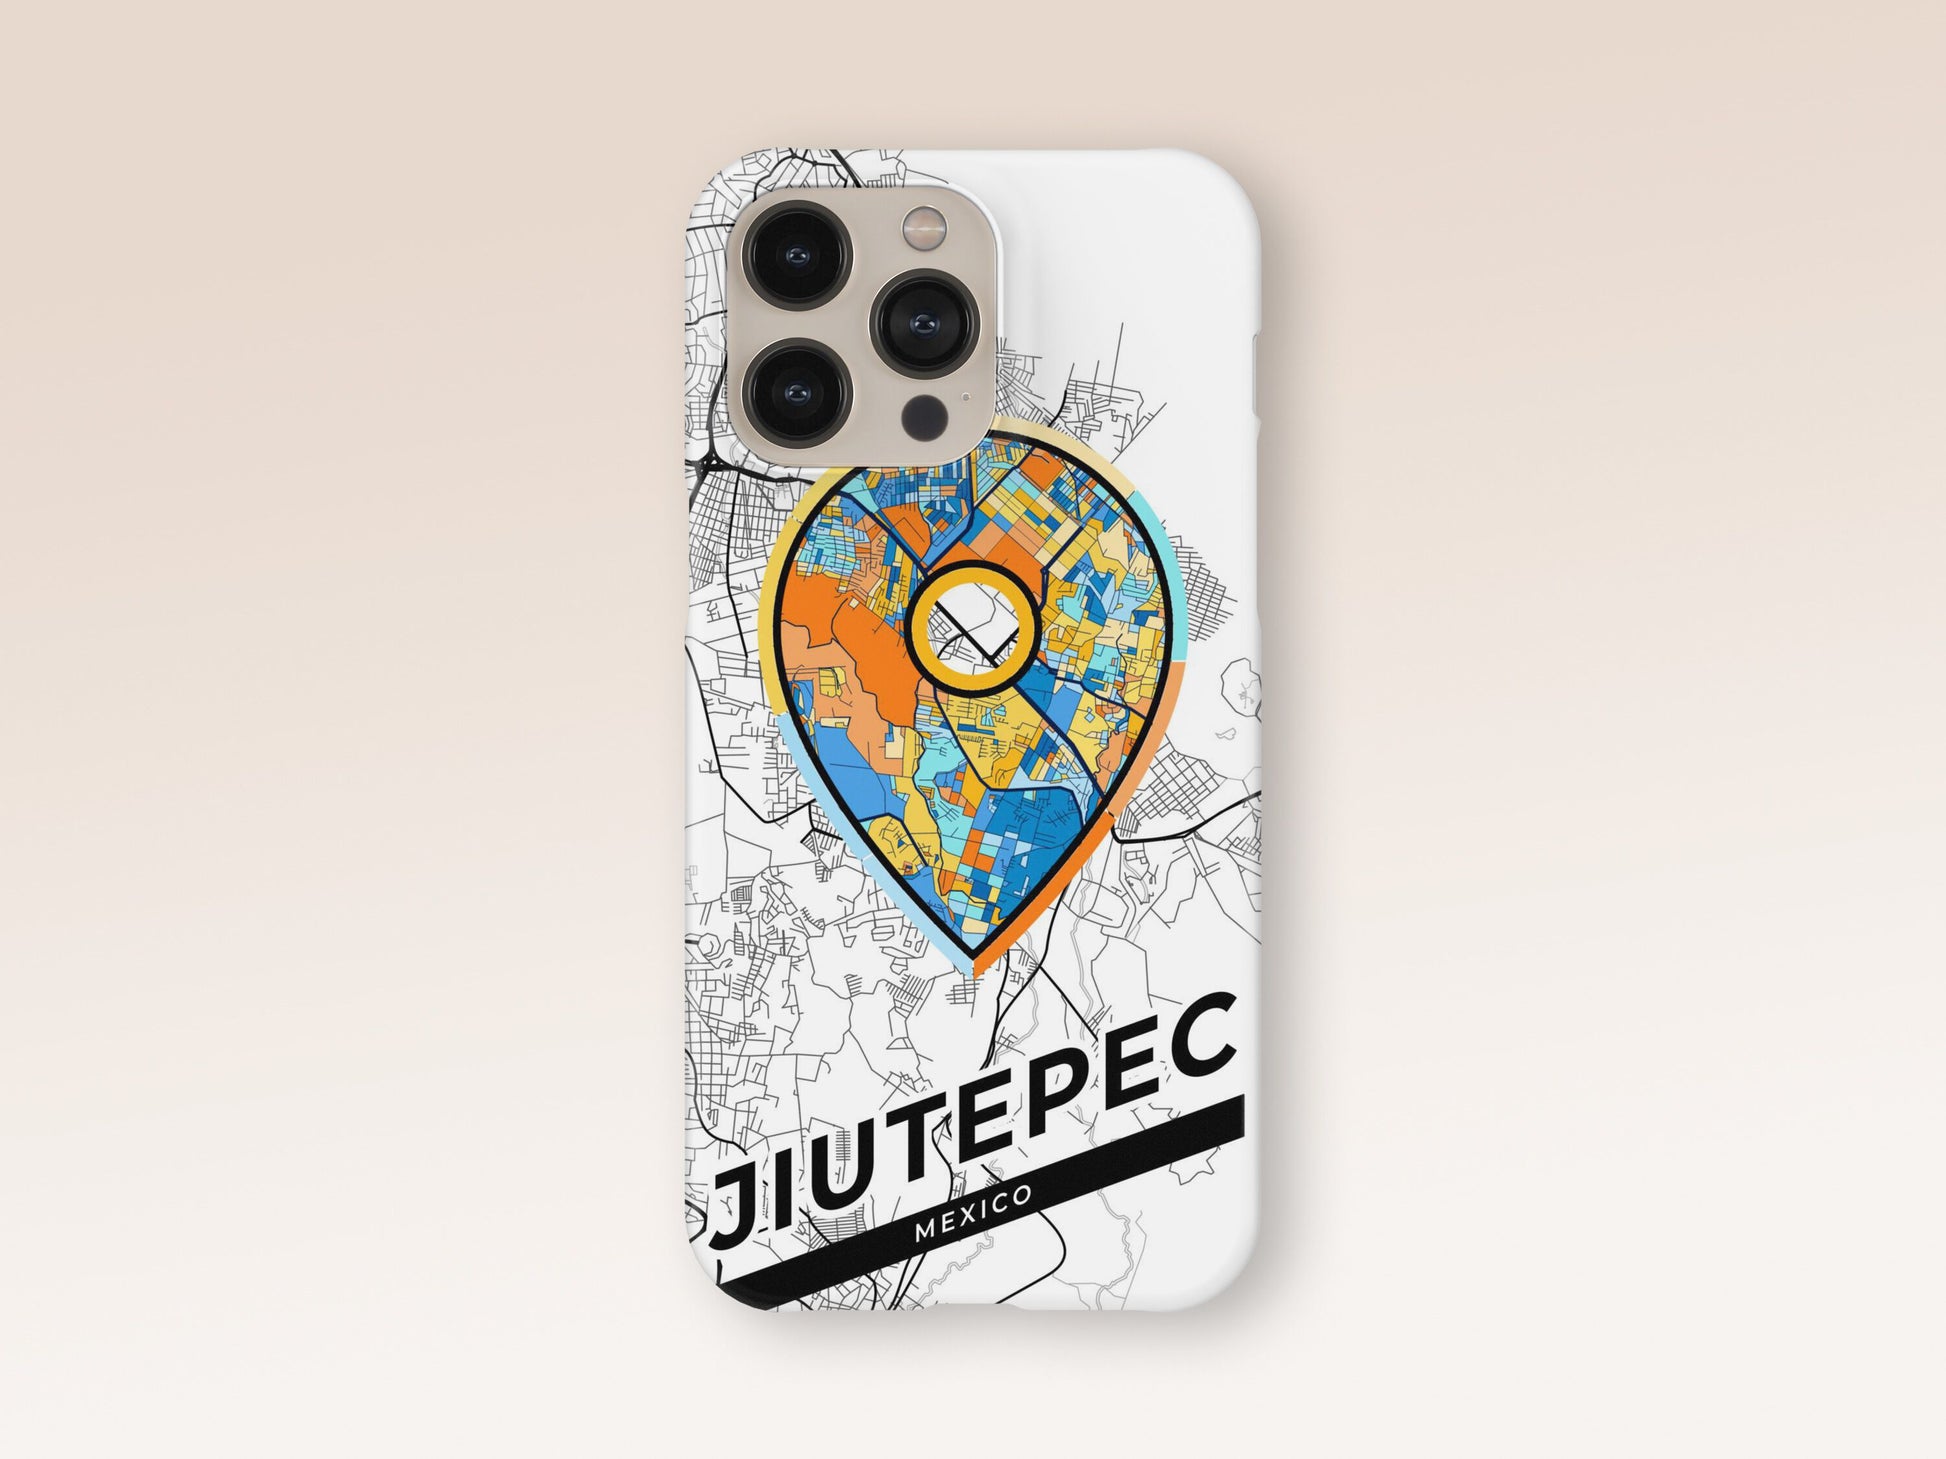 Jiutepec Mexico slim phone case with colorful icon. Birthday, wedding or housewarming gift. Couple match cases. 1